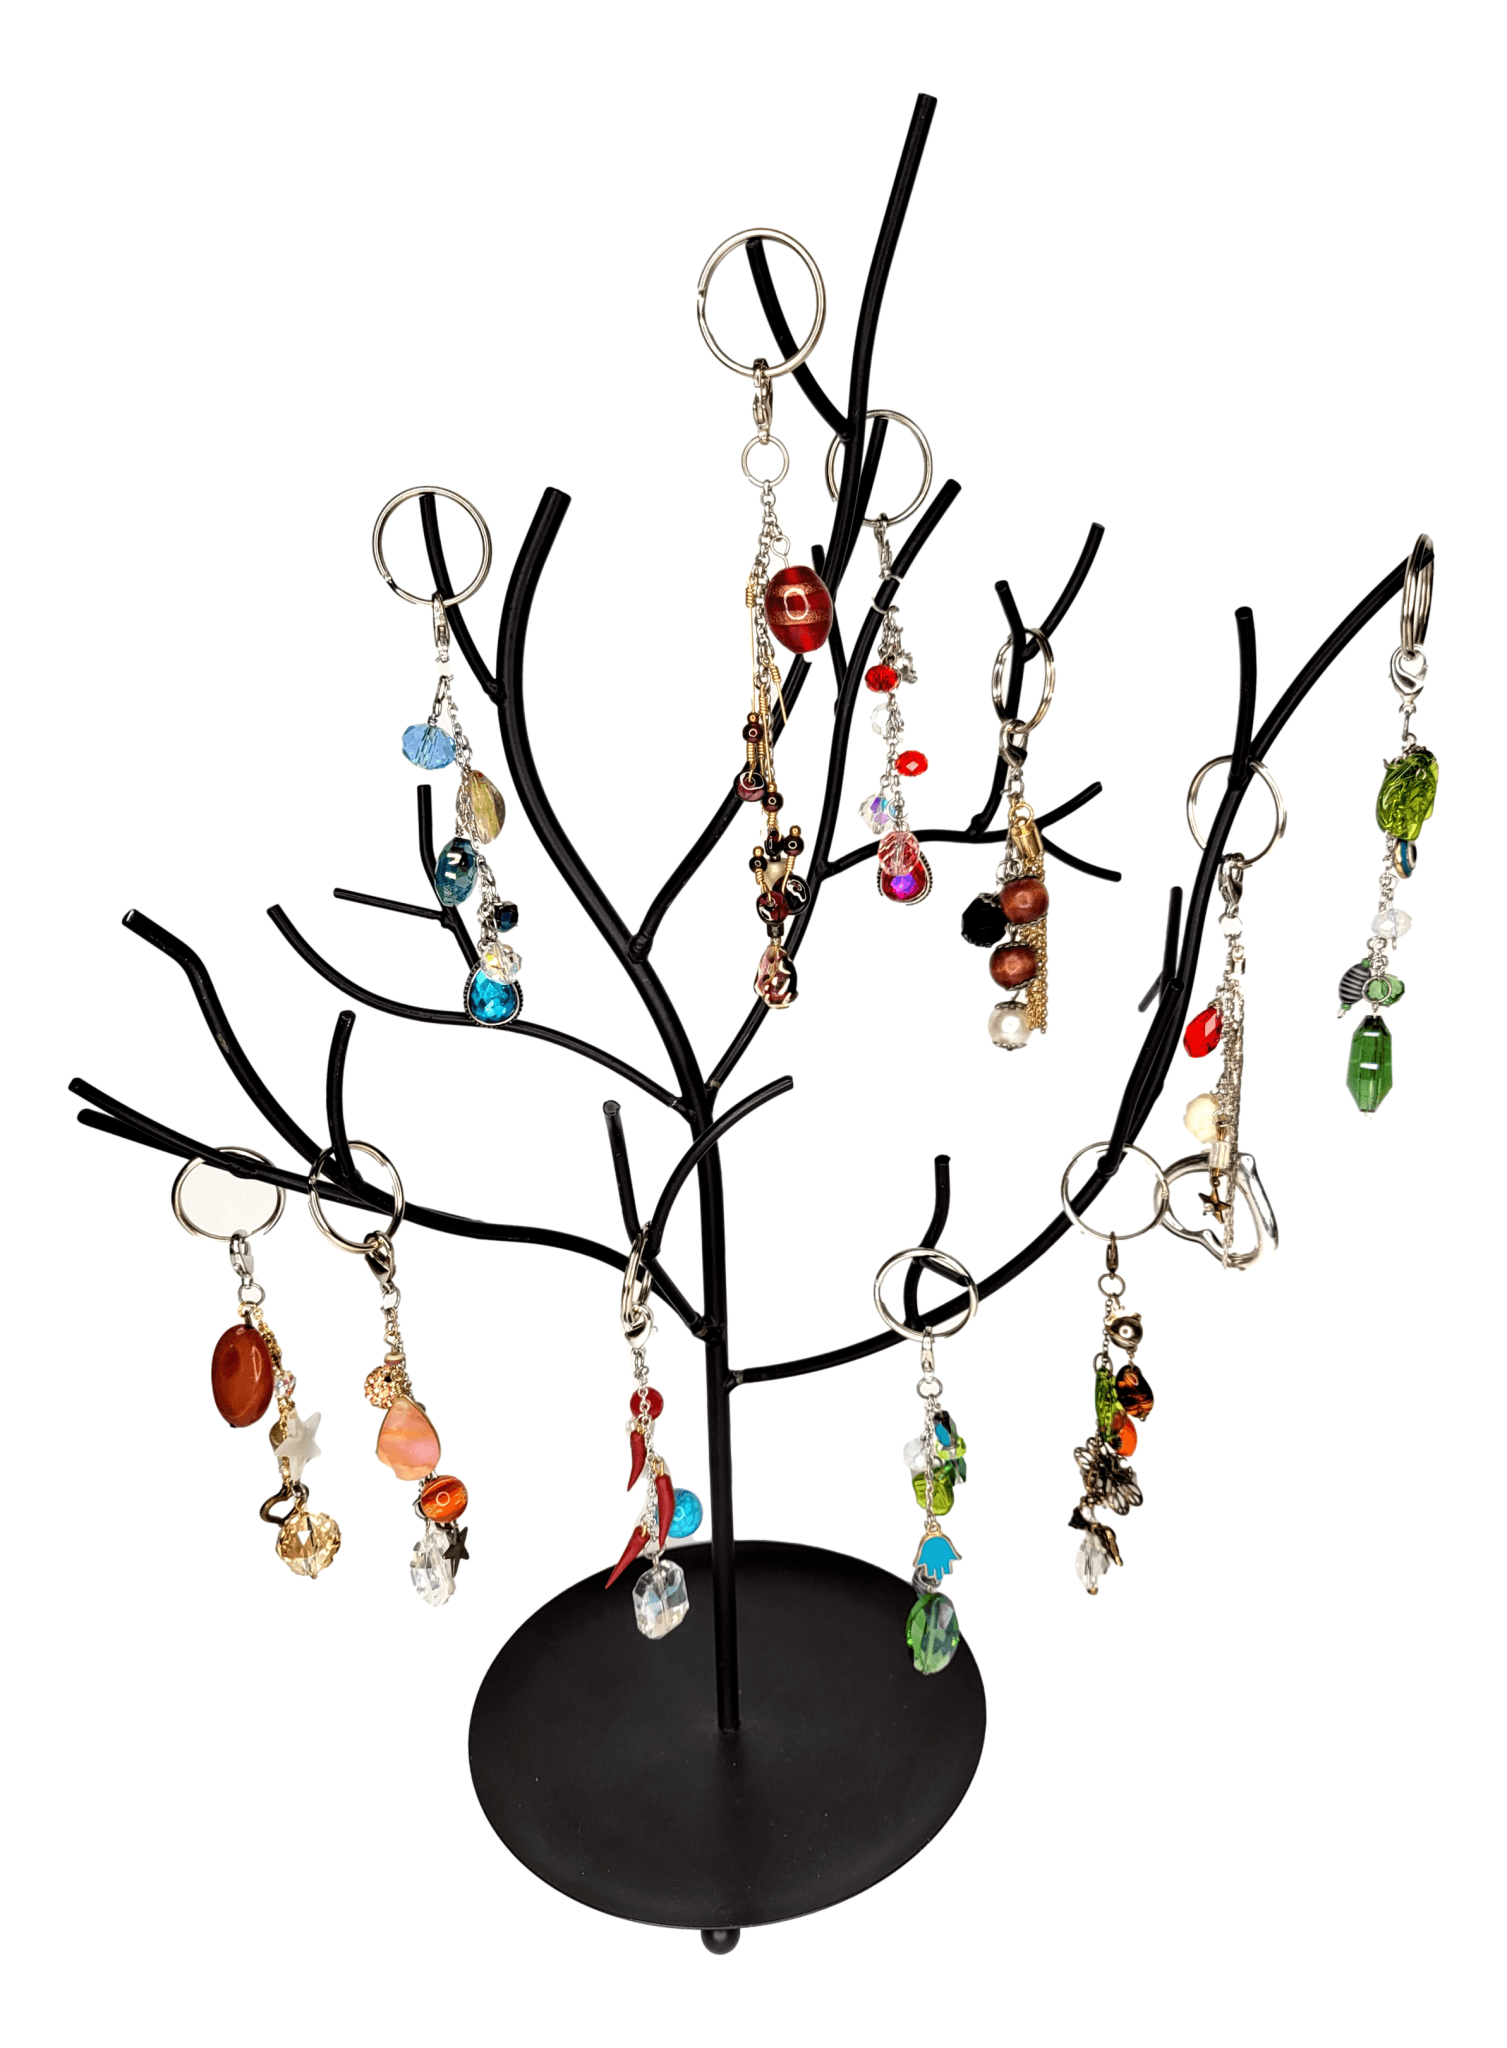 Keychain Ring Assorted Charms and Beads Handcrafted by New Mexico Artisan 4 1/2 L Inches - Ysleta Mission Gift Shop- VOTED El Paso's Best Gift Shop